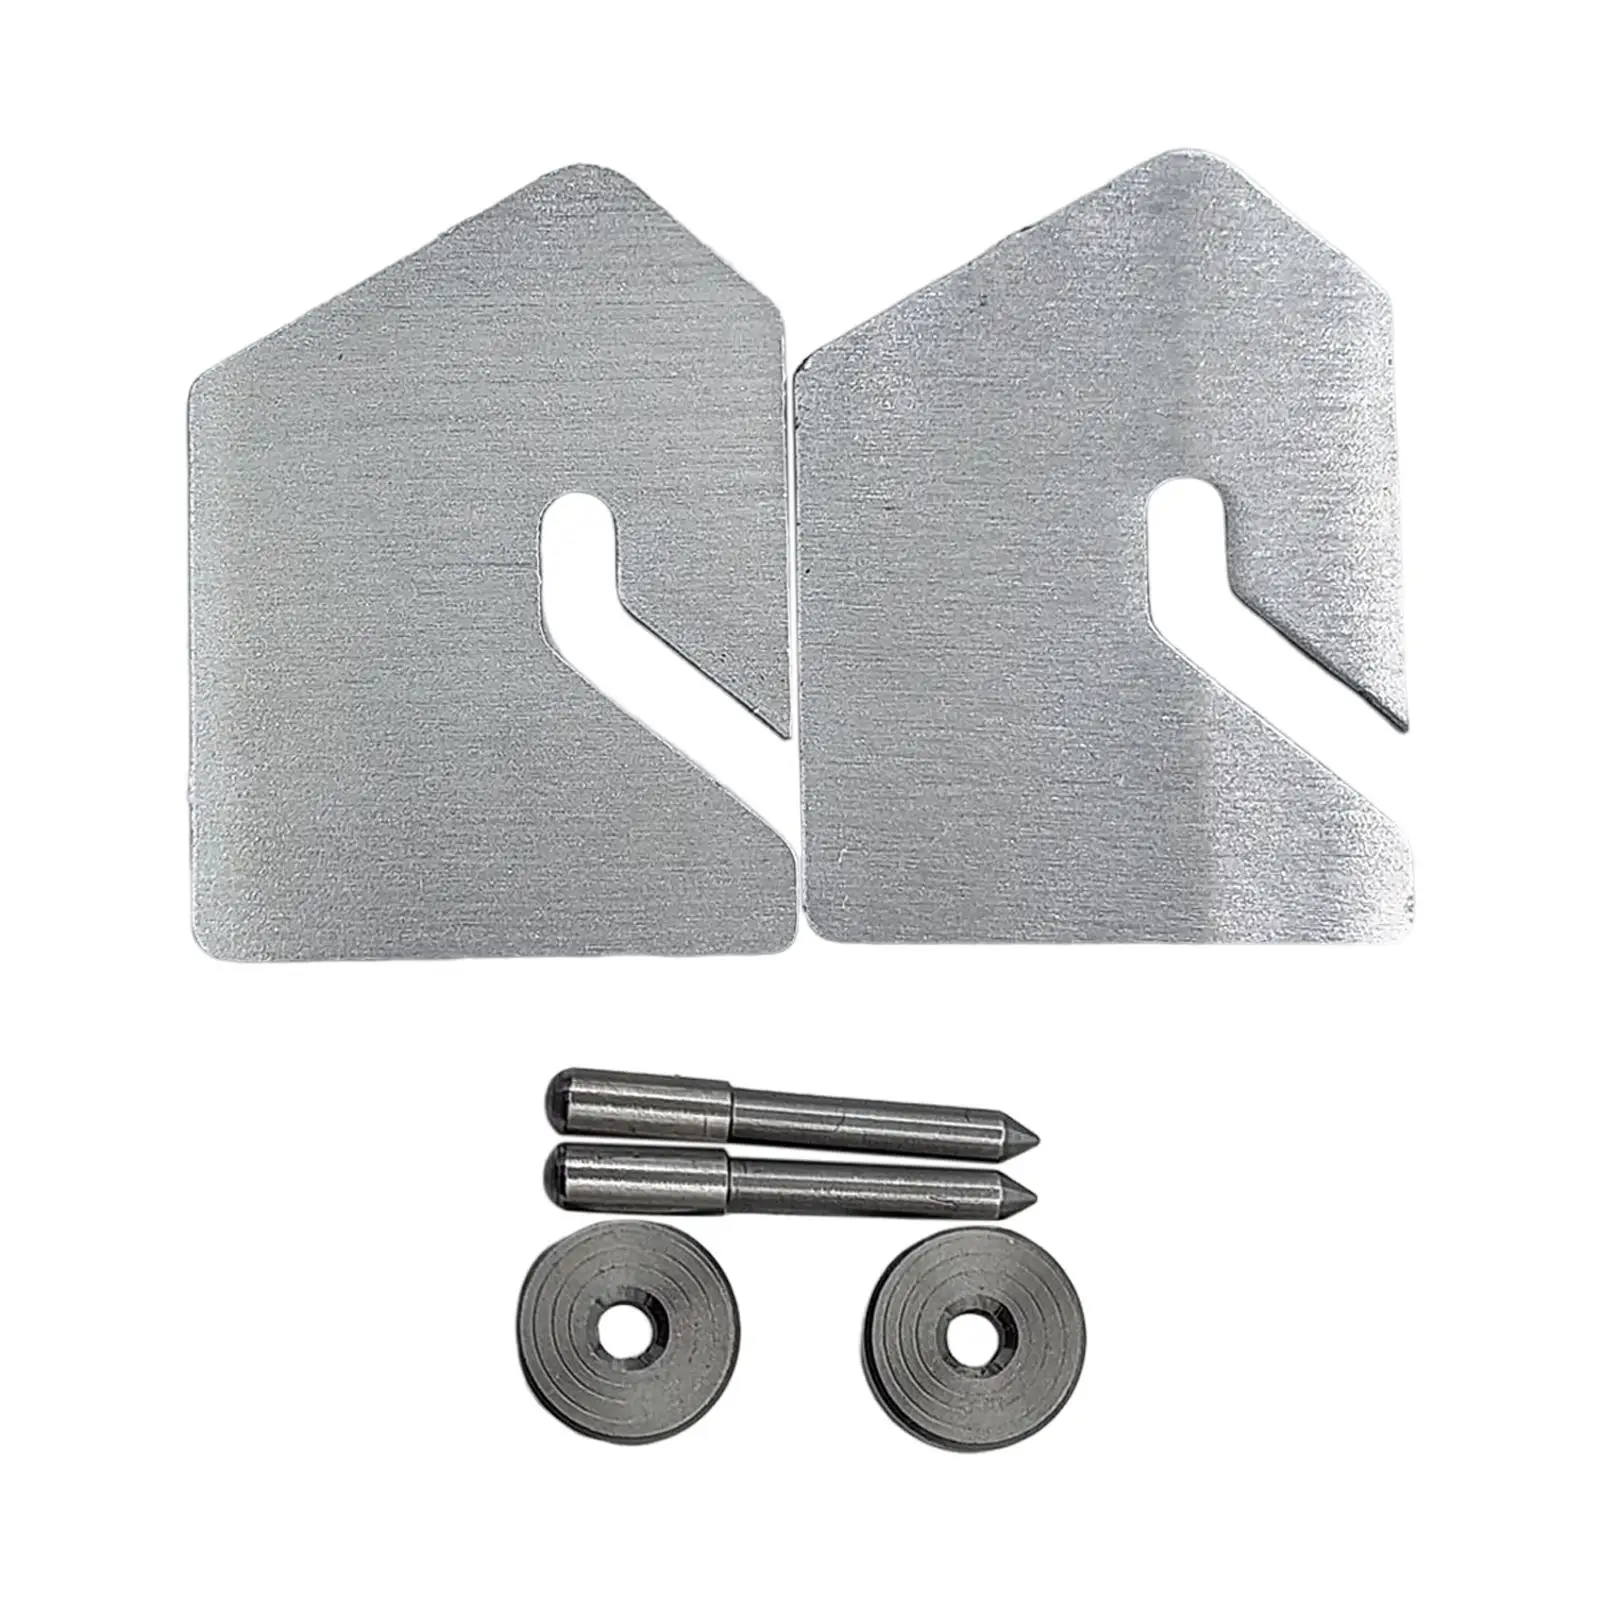 2 Cover Total Hinge Repair Kit Pins Spacers Hinge Set for 0 145 165 Direct fit, no modification requires, easy installation